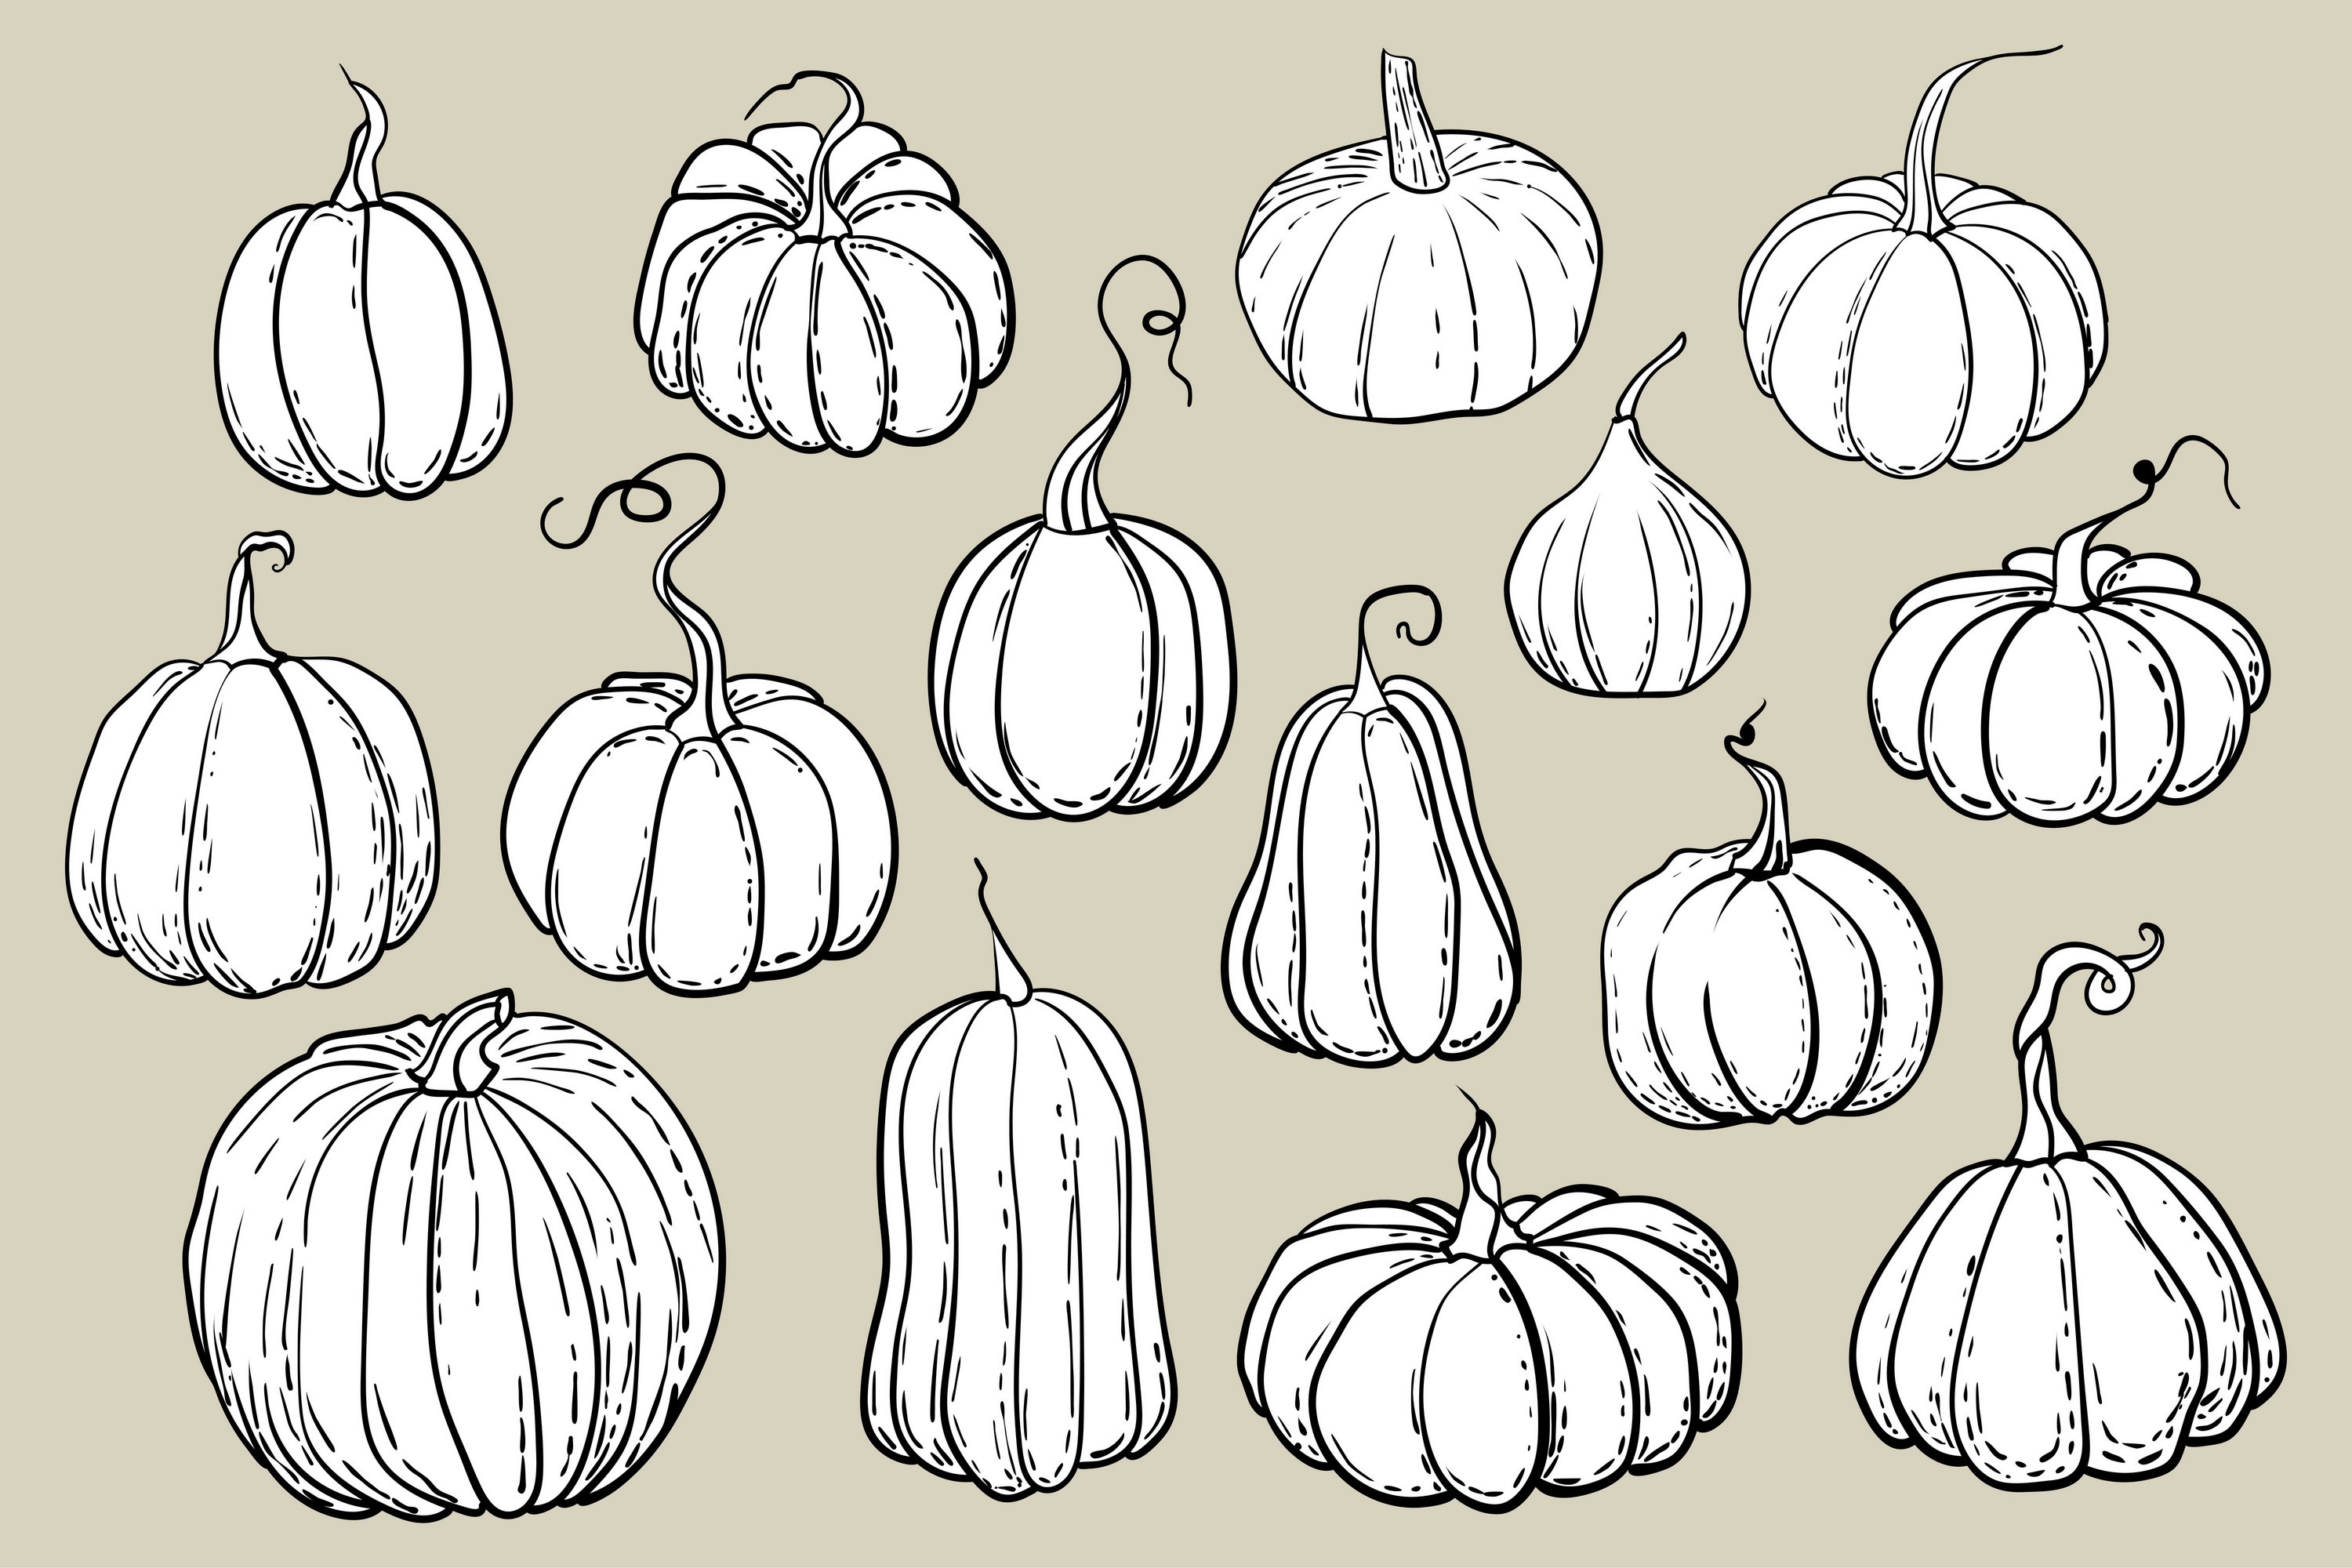 White pumpkins with different shapes.